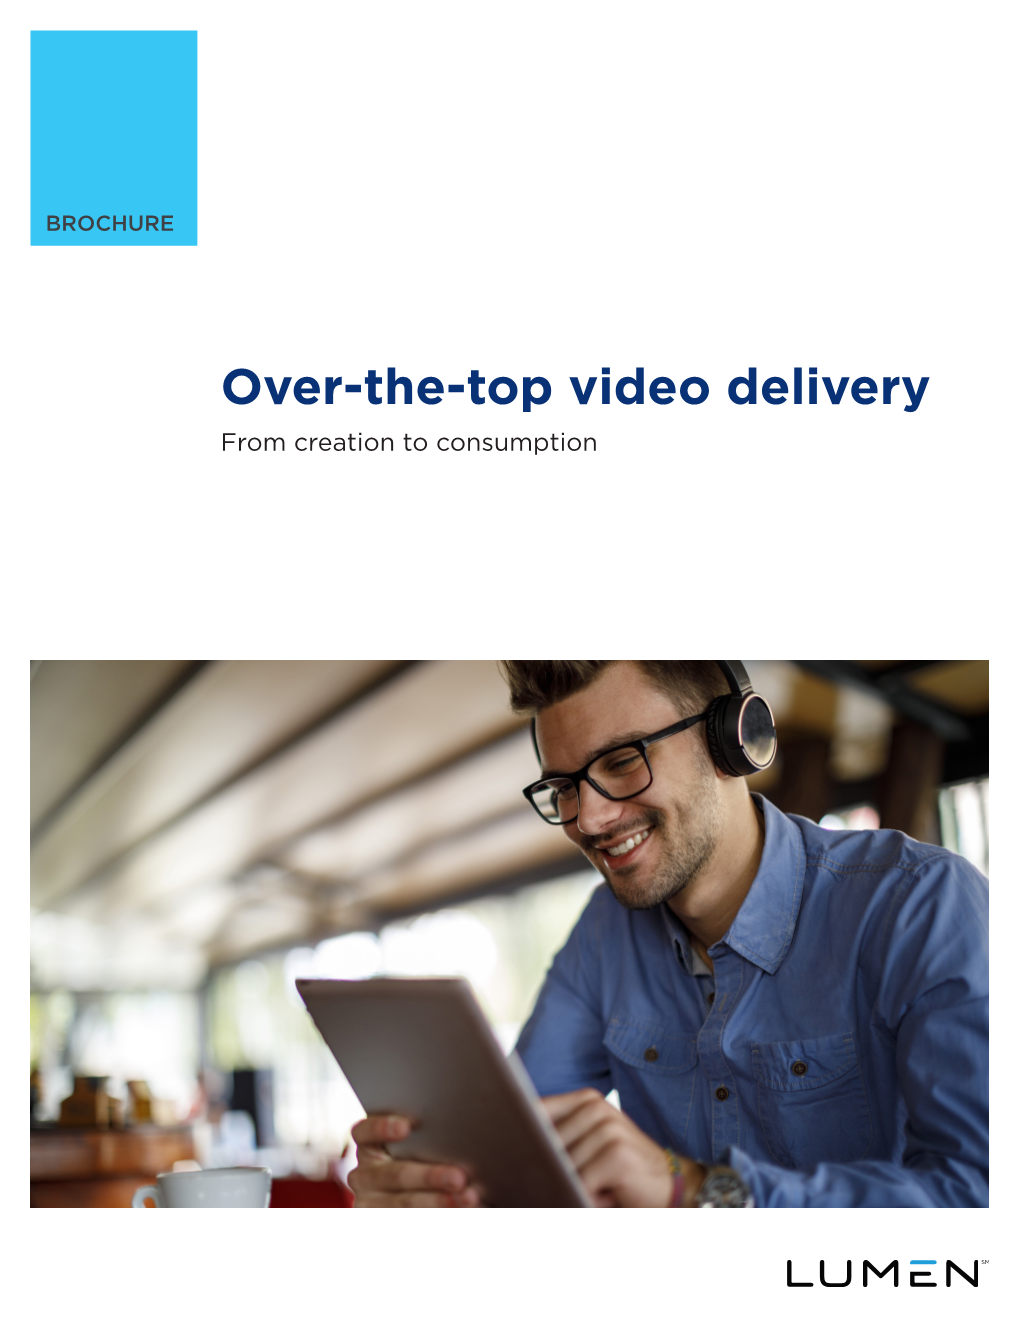 Over-The-Top Video Delivery from Creation to Consumption Summary